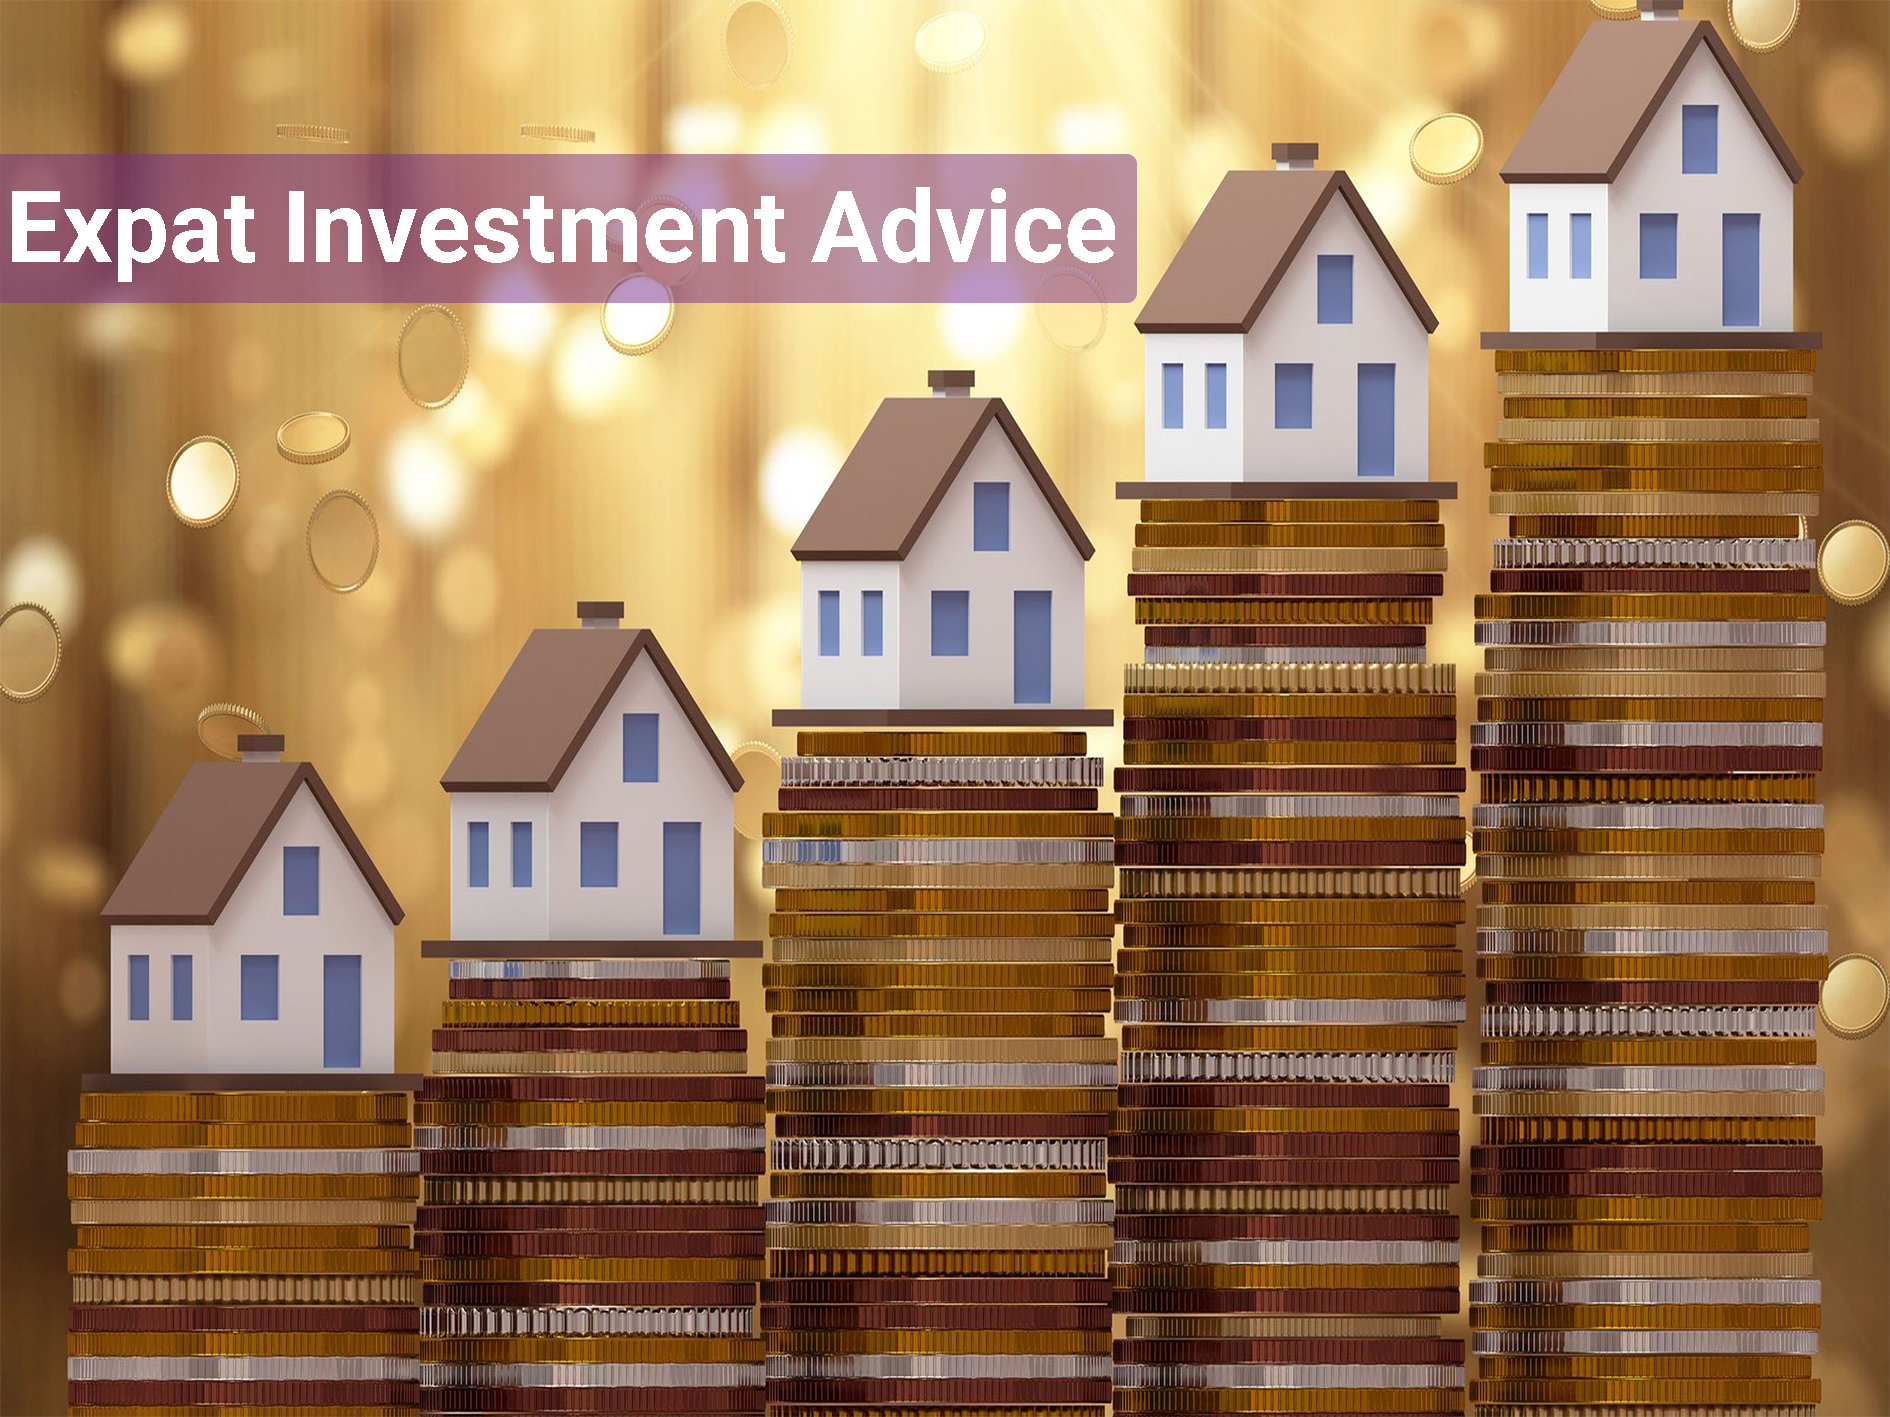 Expat Investment Advice